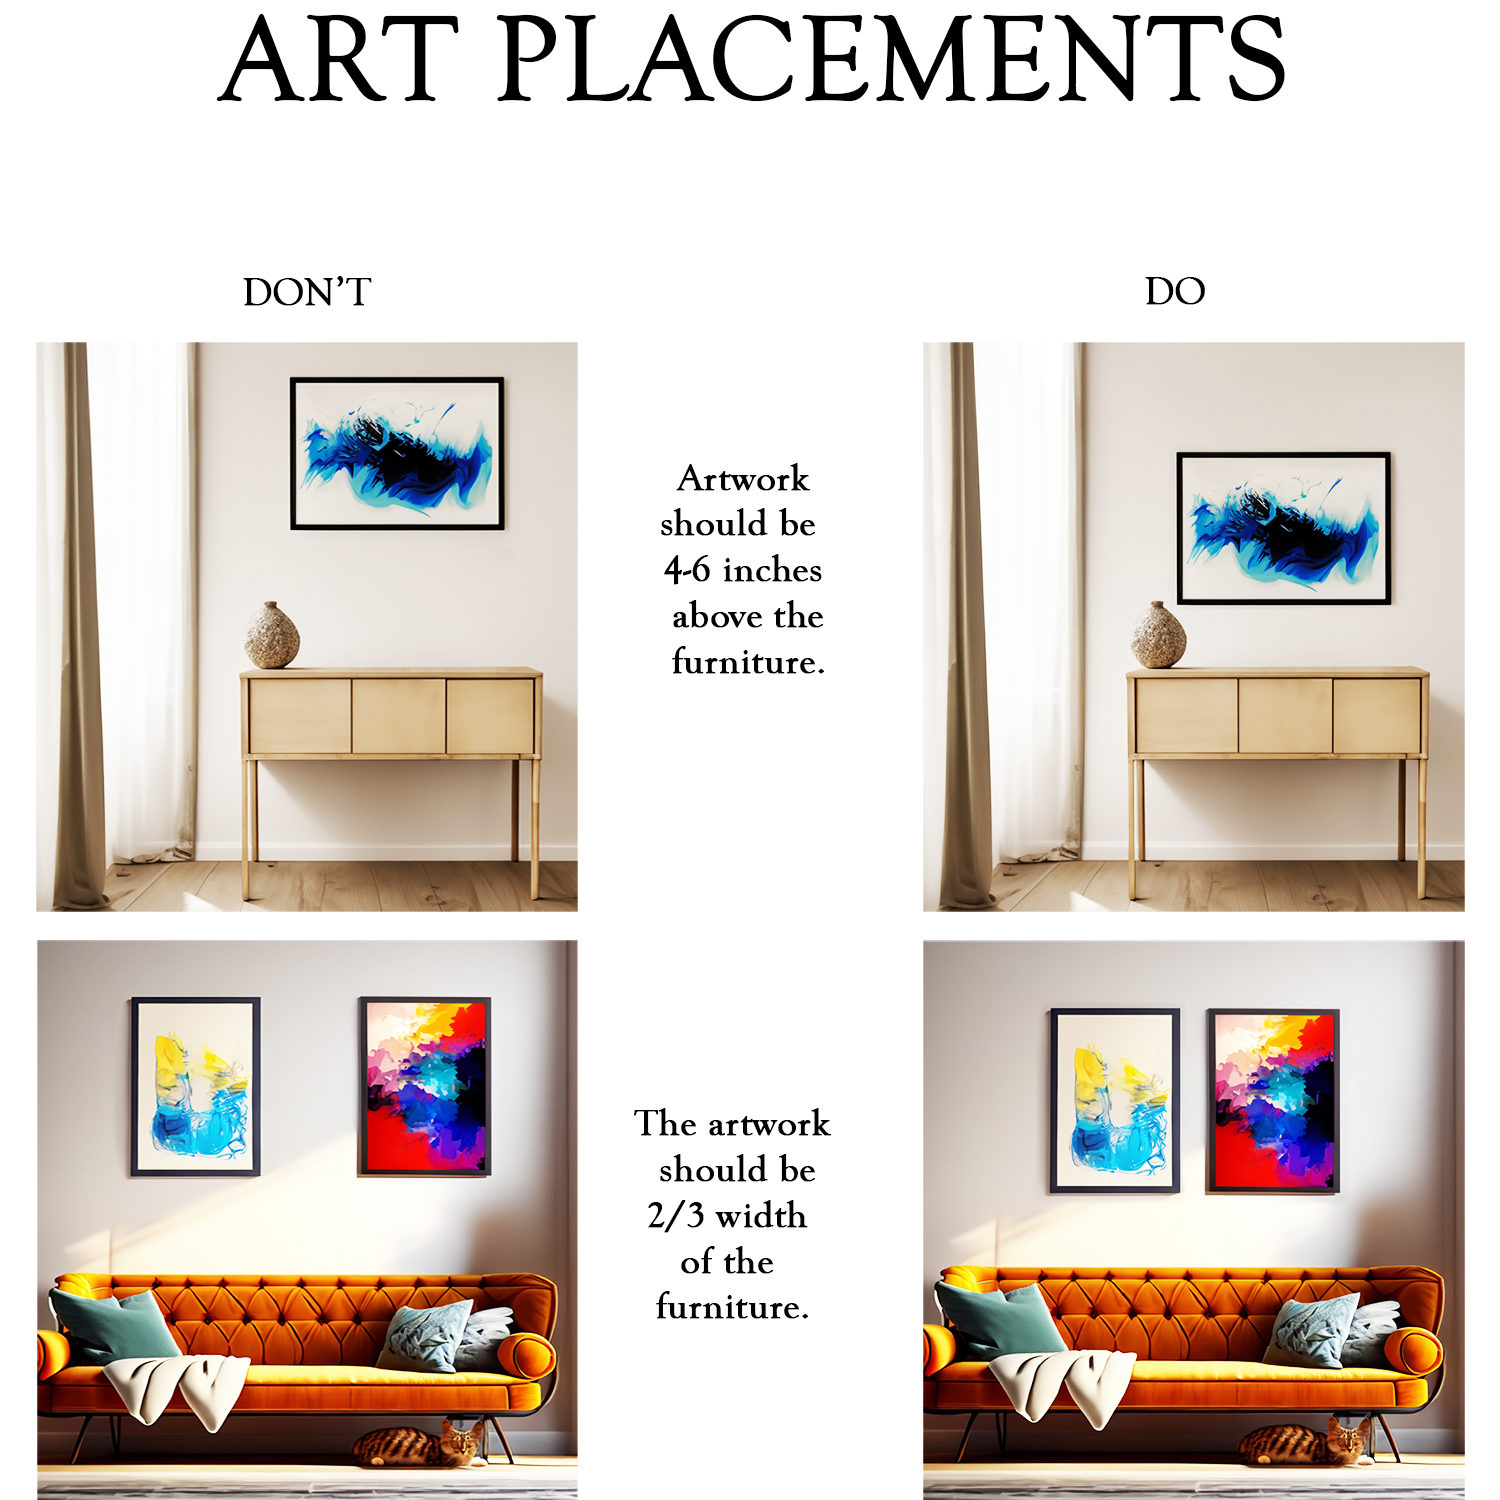 Simple Rules for Art Placements